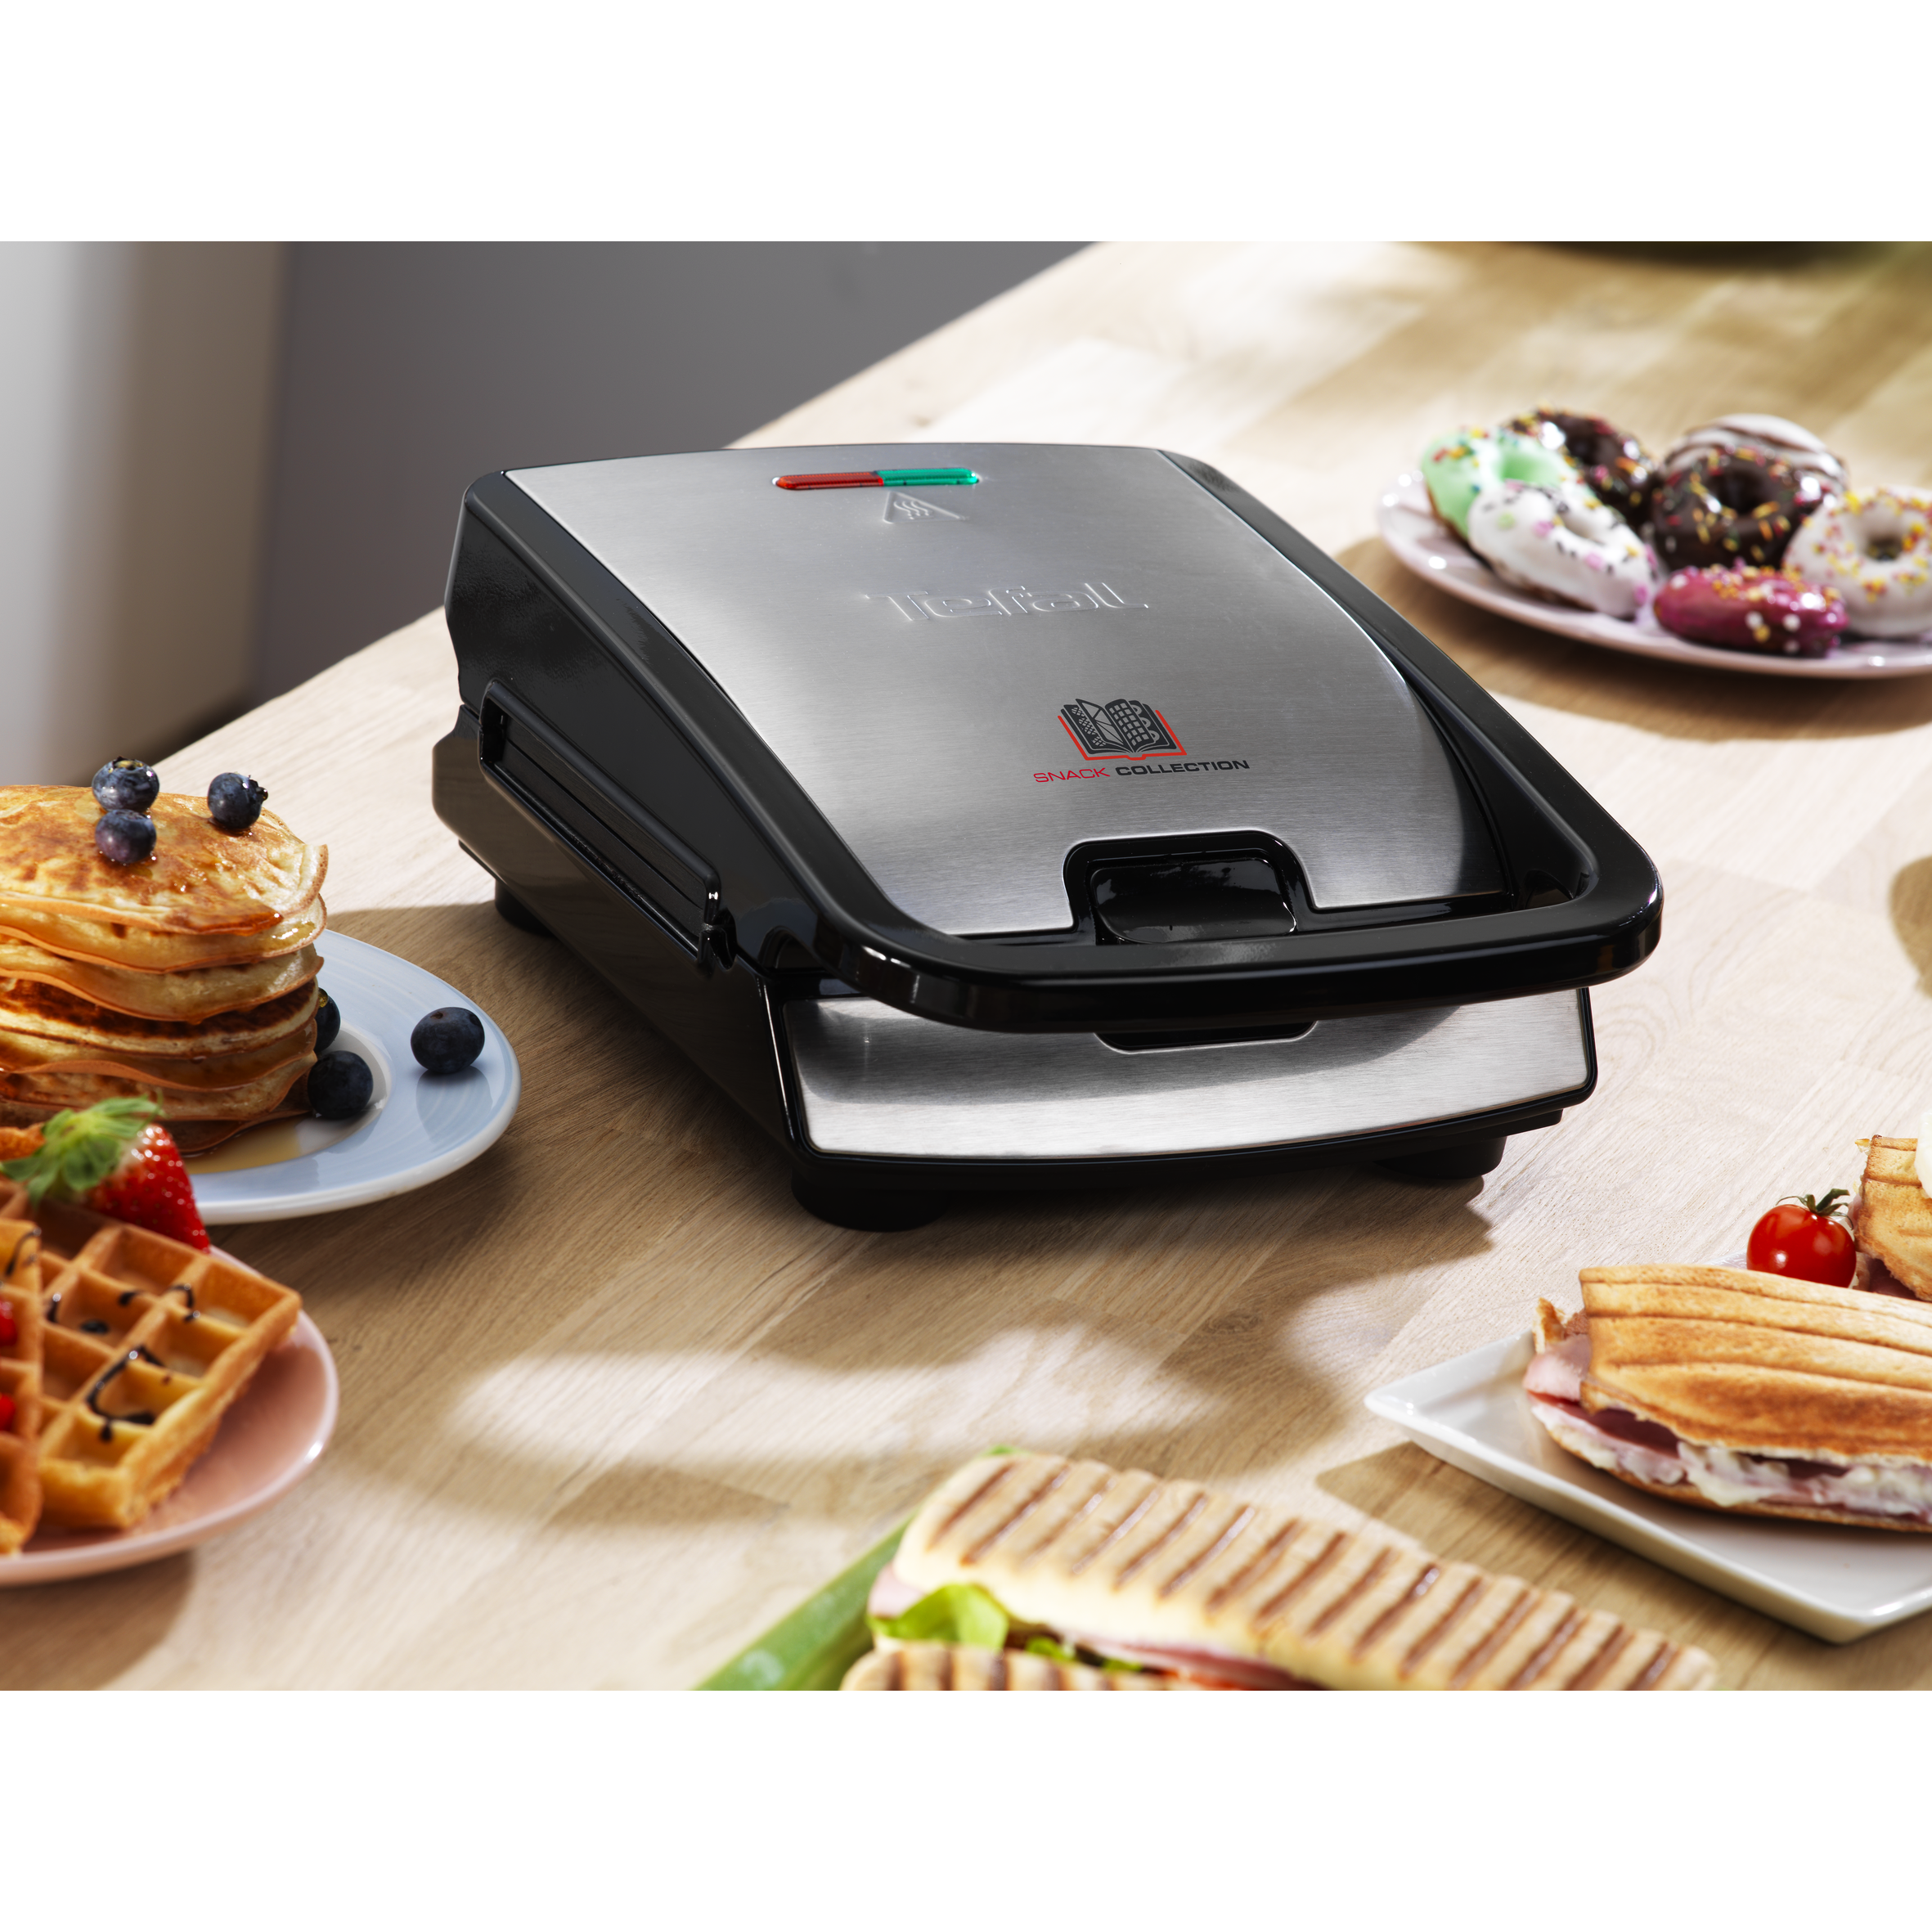 Coffret Snack Collection (Tefal) : Le grill paninis / viandes 